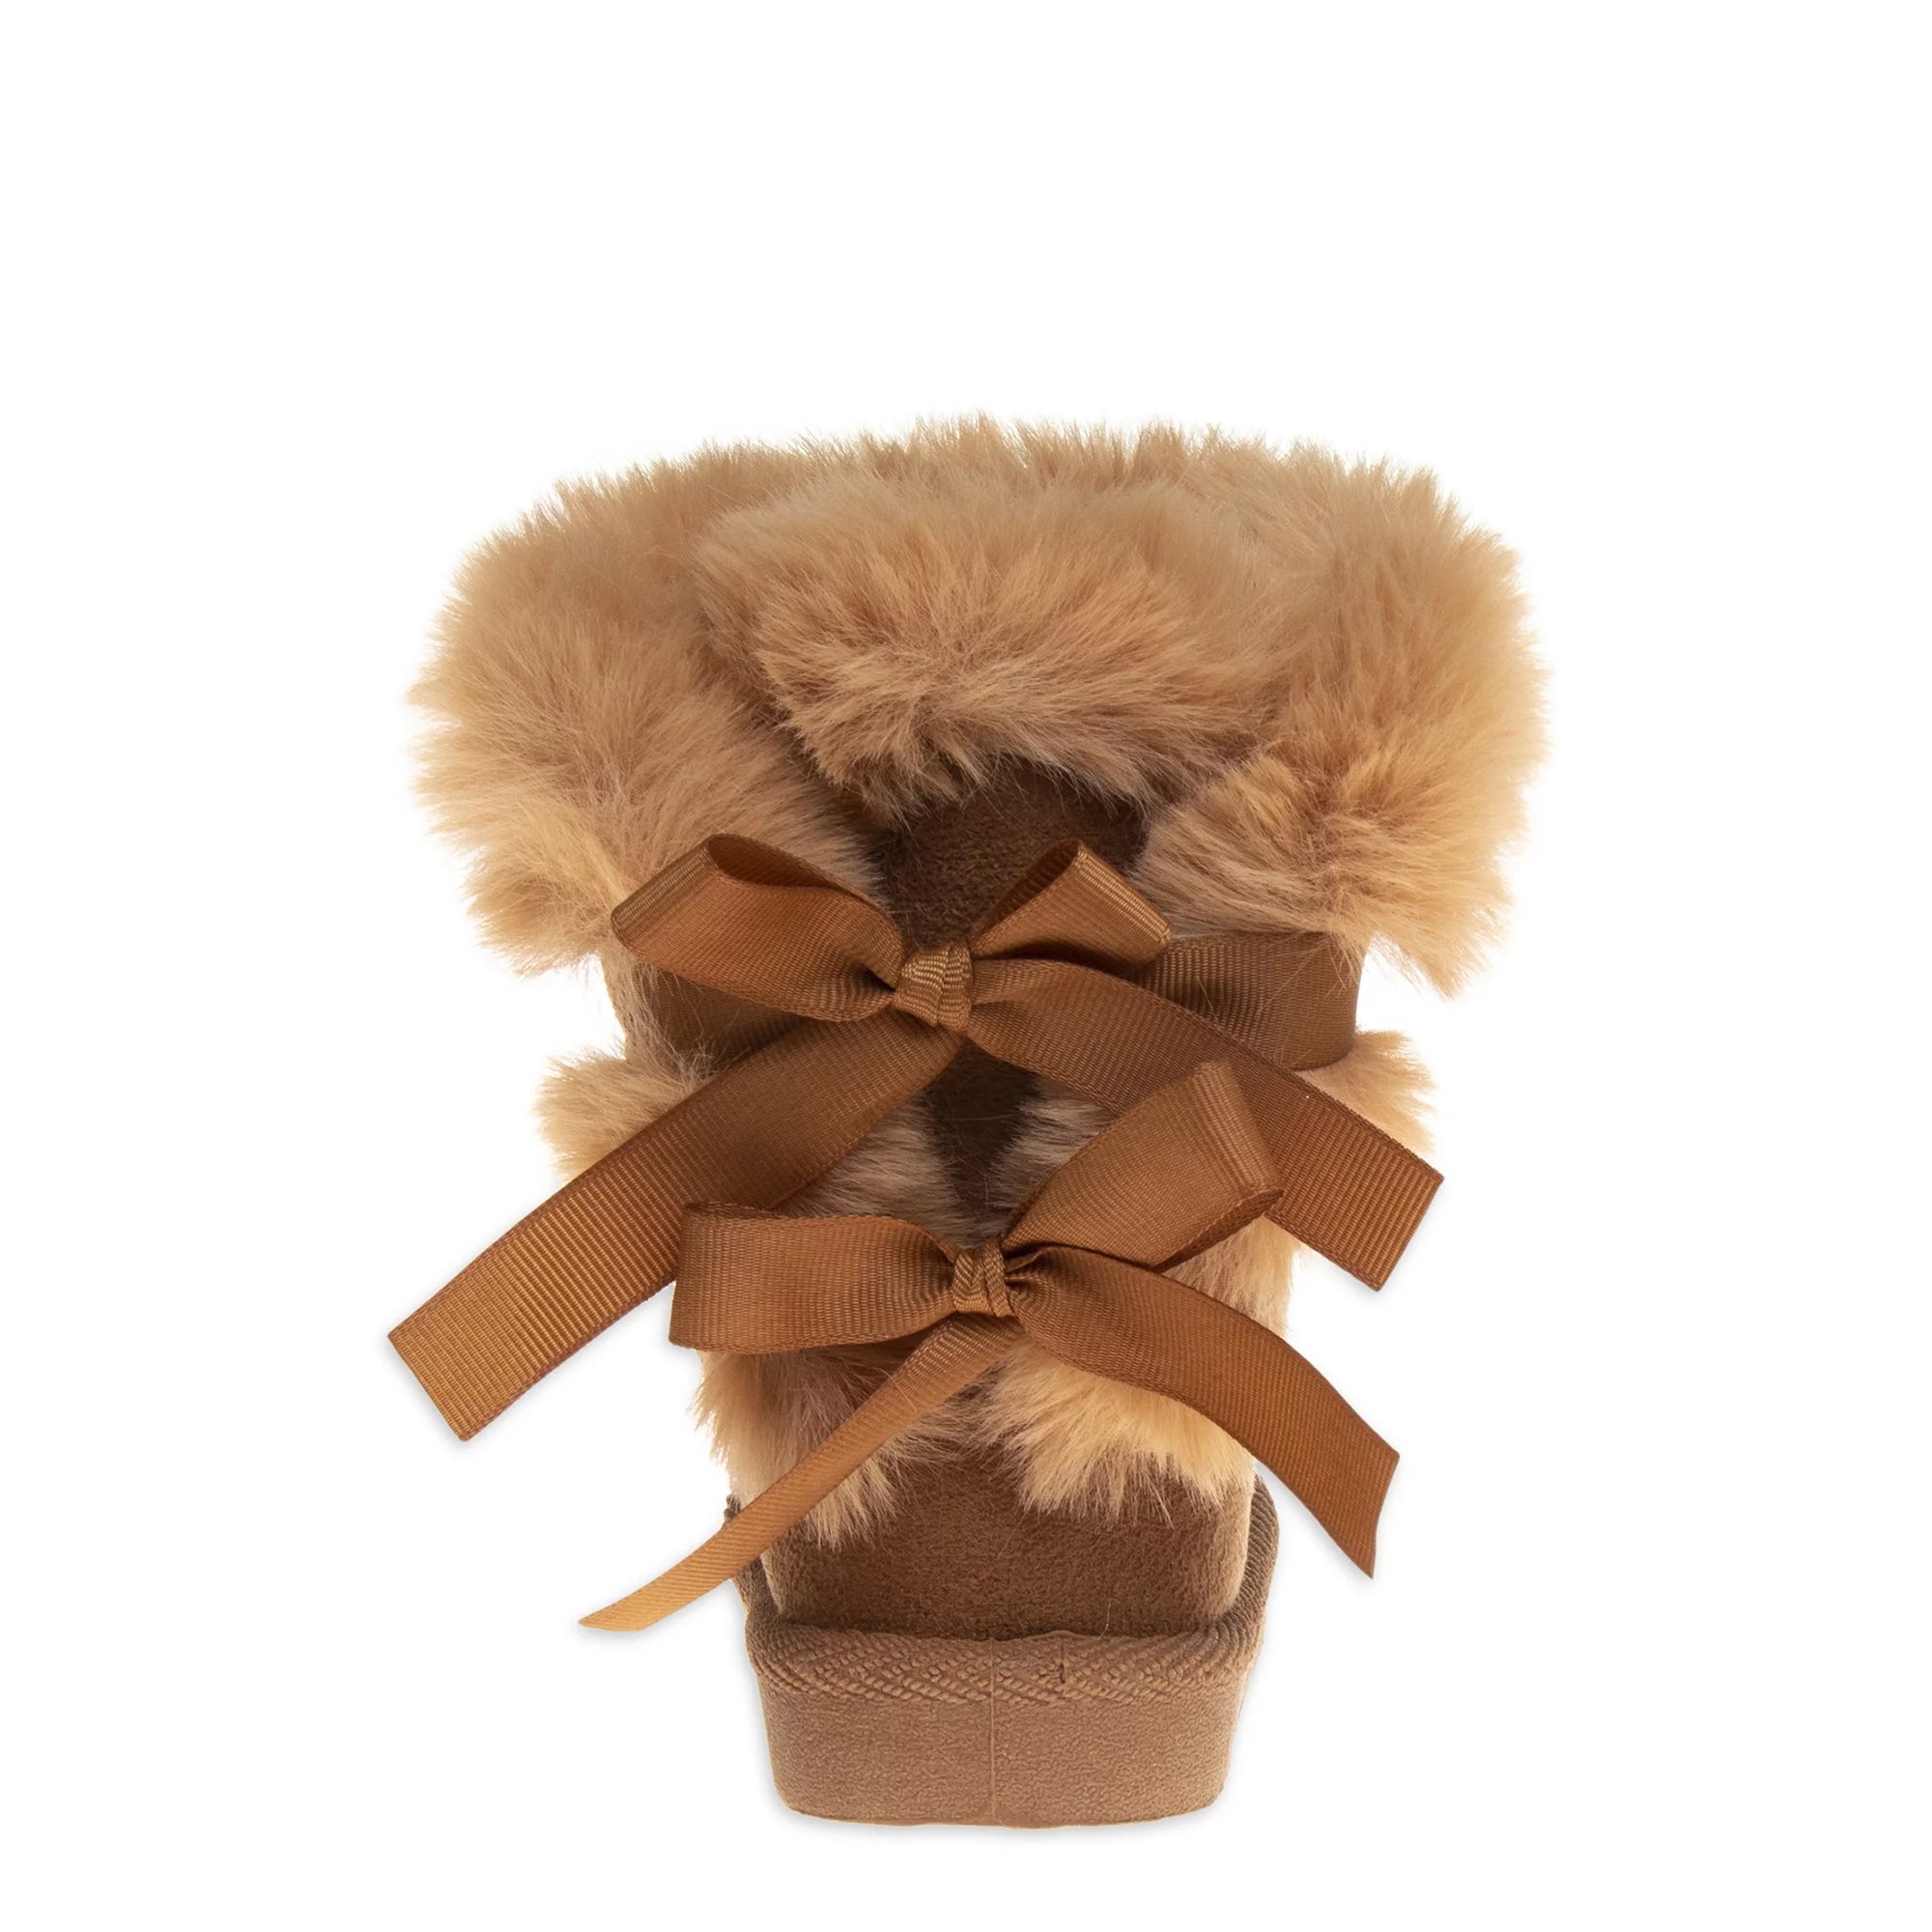 Josmo Faux Shearling Bow Boots